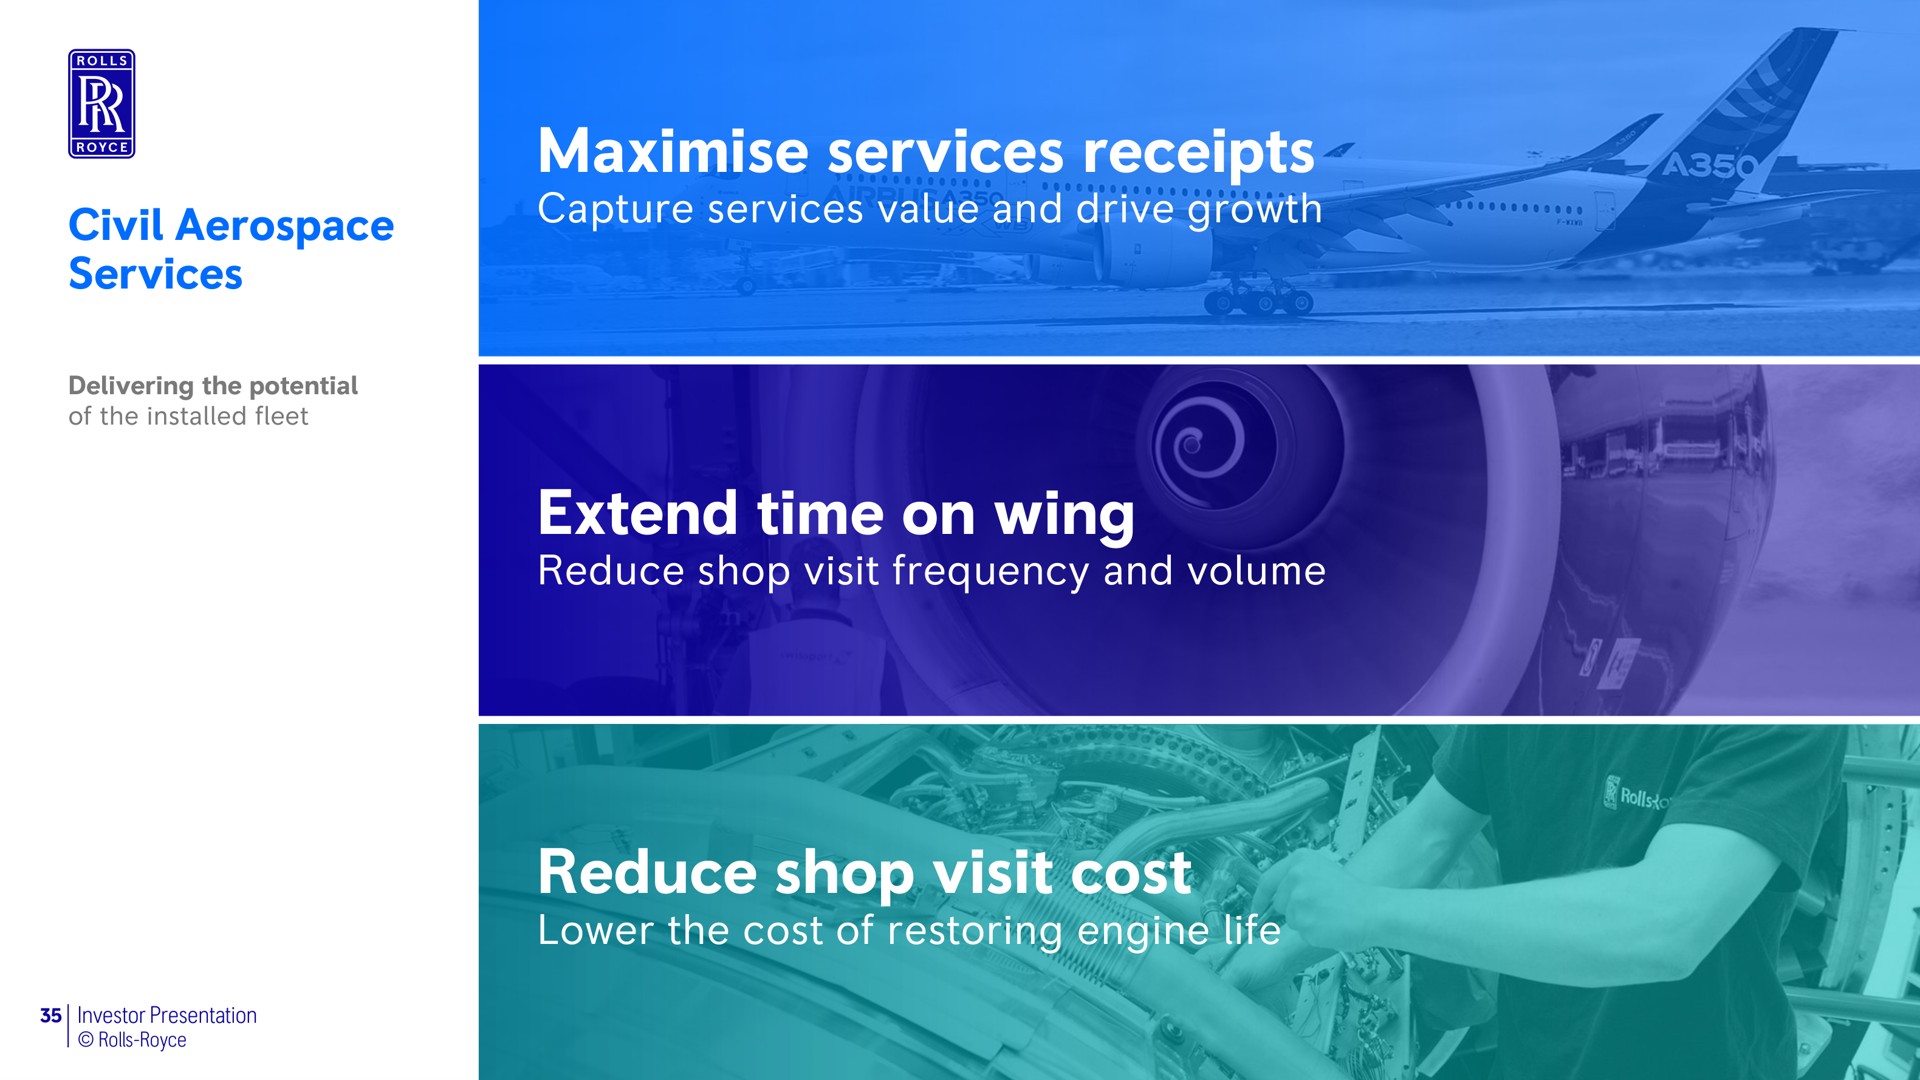 civil services services receipts capture services value and drive growth extend time on wing reduce shop visit frequency and volume reduce shop visit cost lower the cost of restoring engine life | Rolls-Royce Holdings